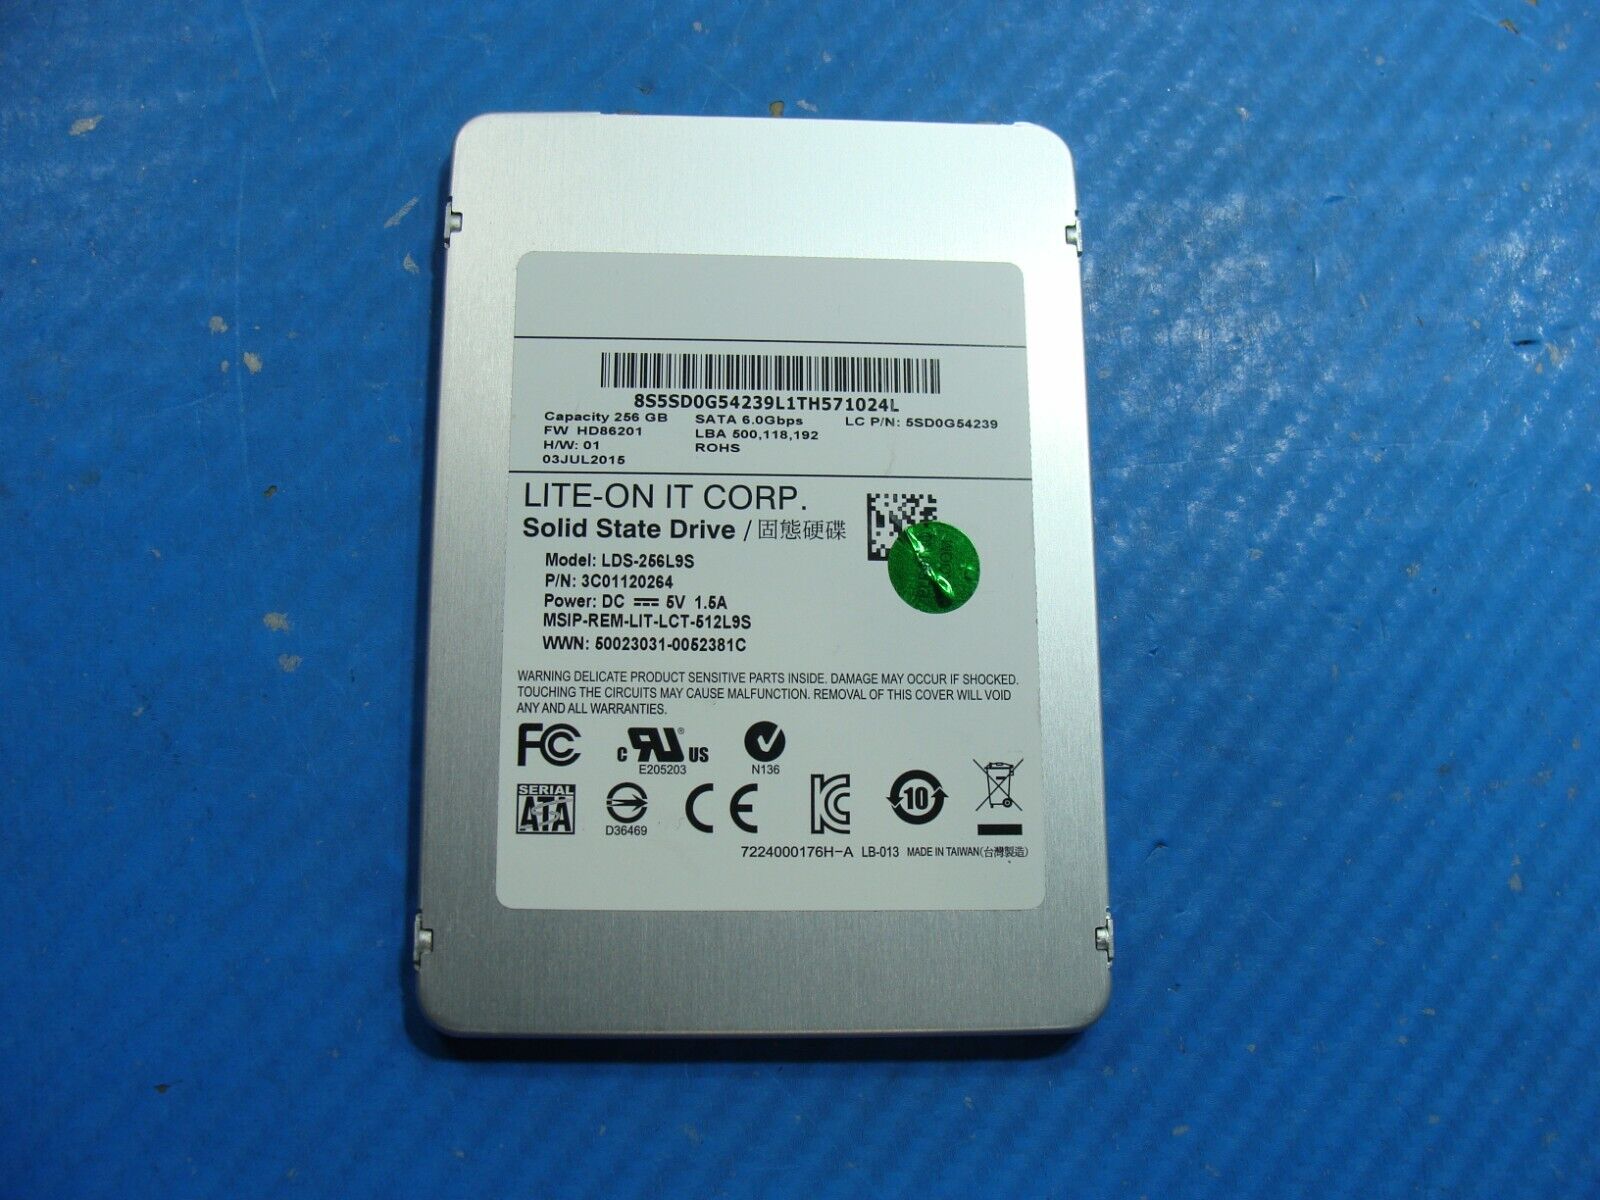 Lenovo 3 14 80JH LITE-ON 256GB SATA M.2 SSD Solid State Drive LDS-256L9S